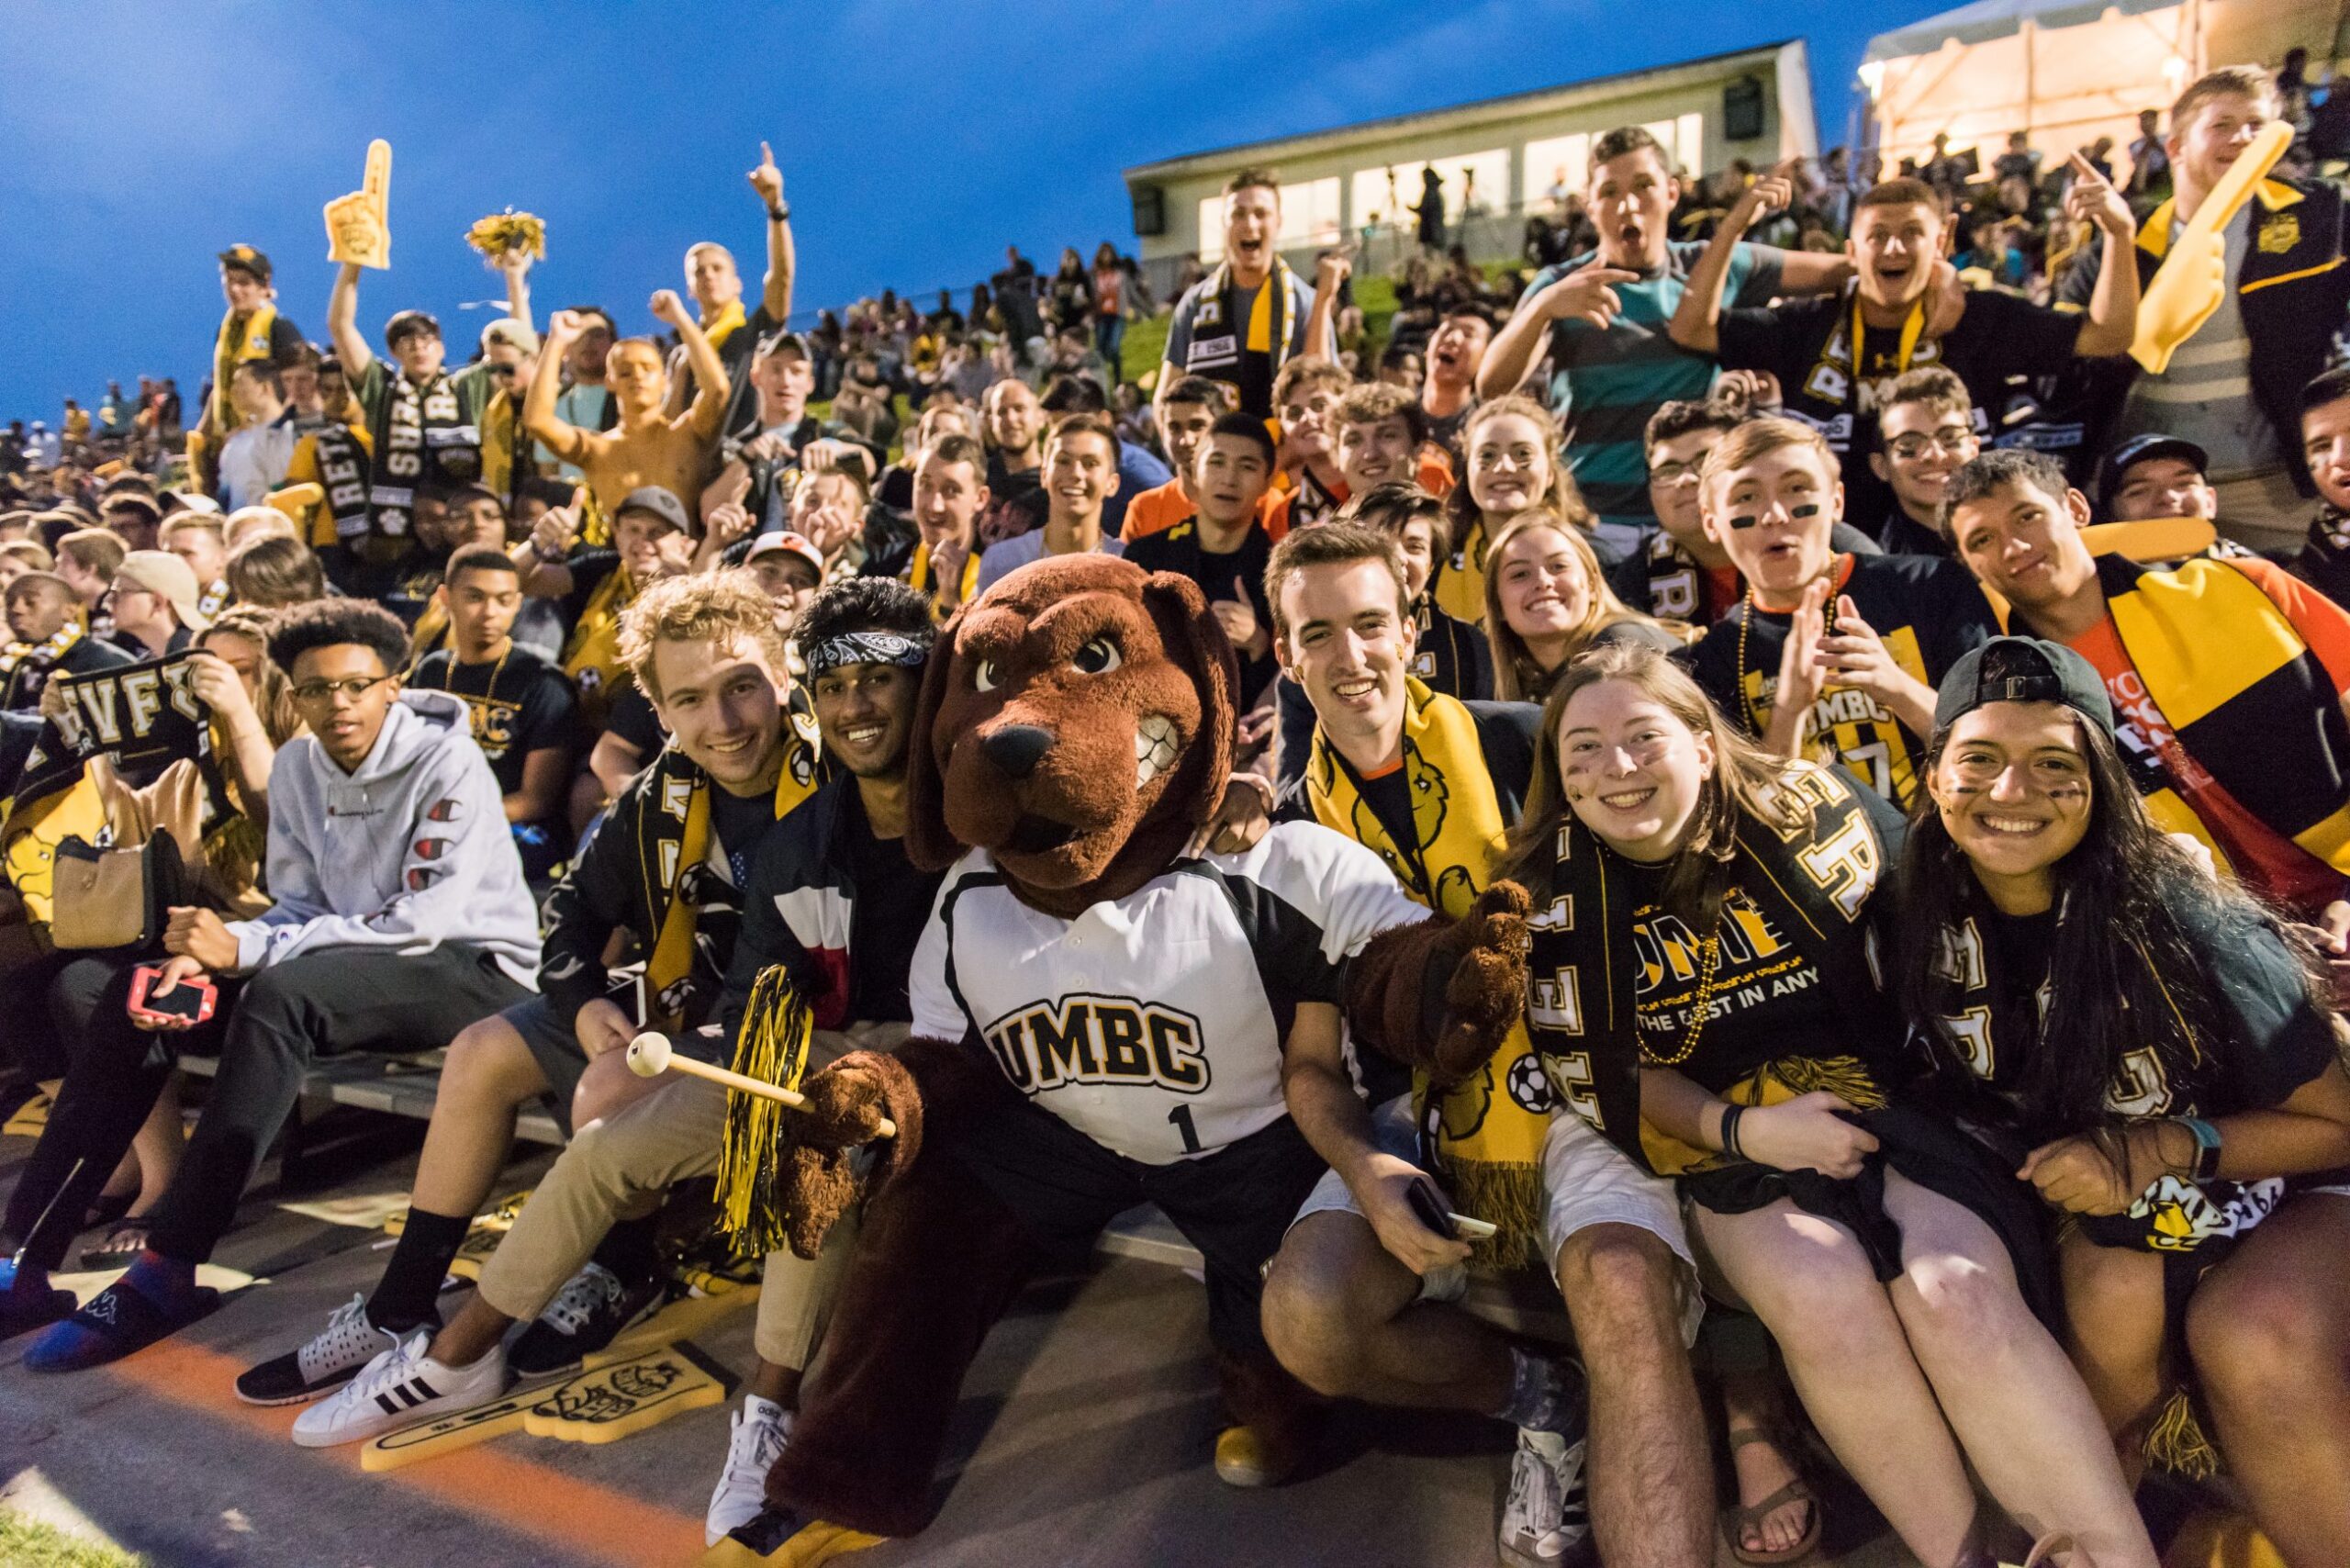 Retriever Nation gears up for UMBC’s first Giving Day #blackandgoldrush